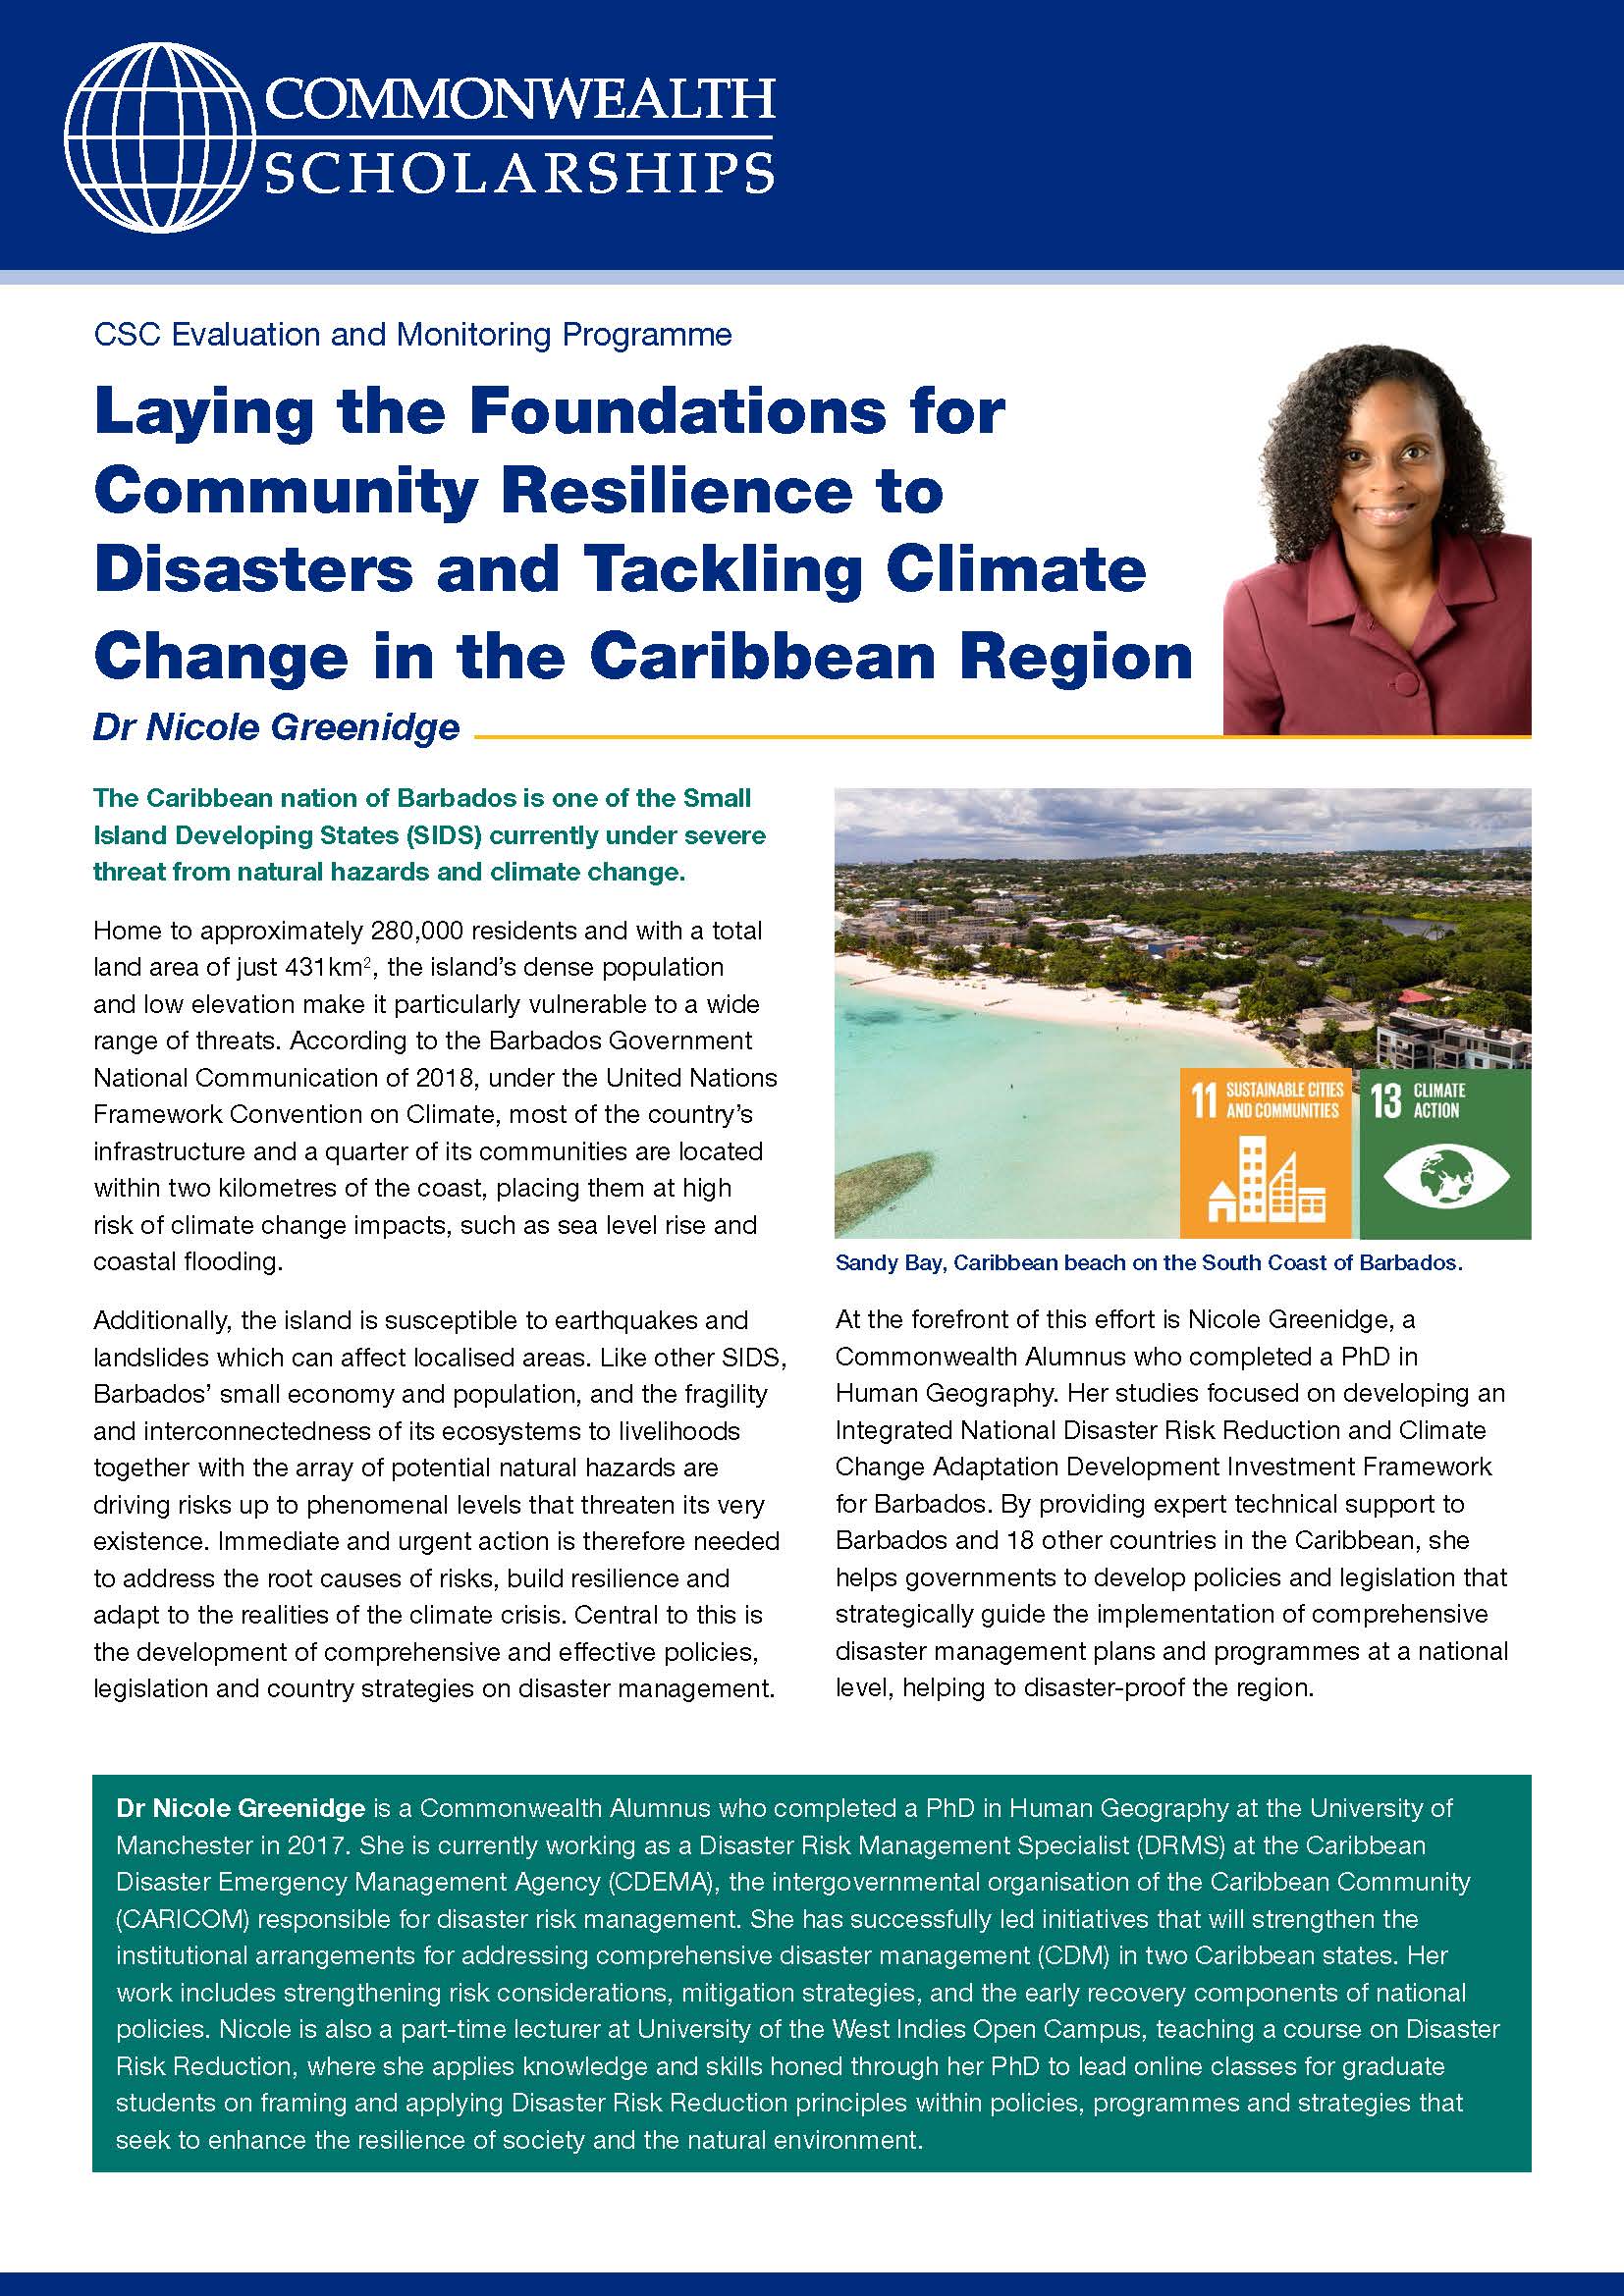 Read the Laying the Foundations for Community Resilience to Disasters and Tackling Climate Change in the Caribbean Region case study